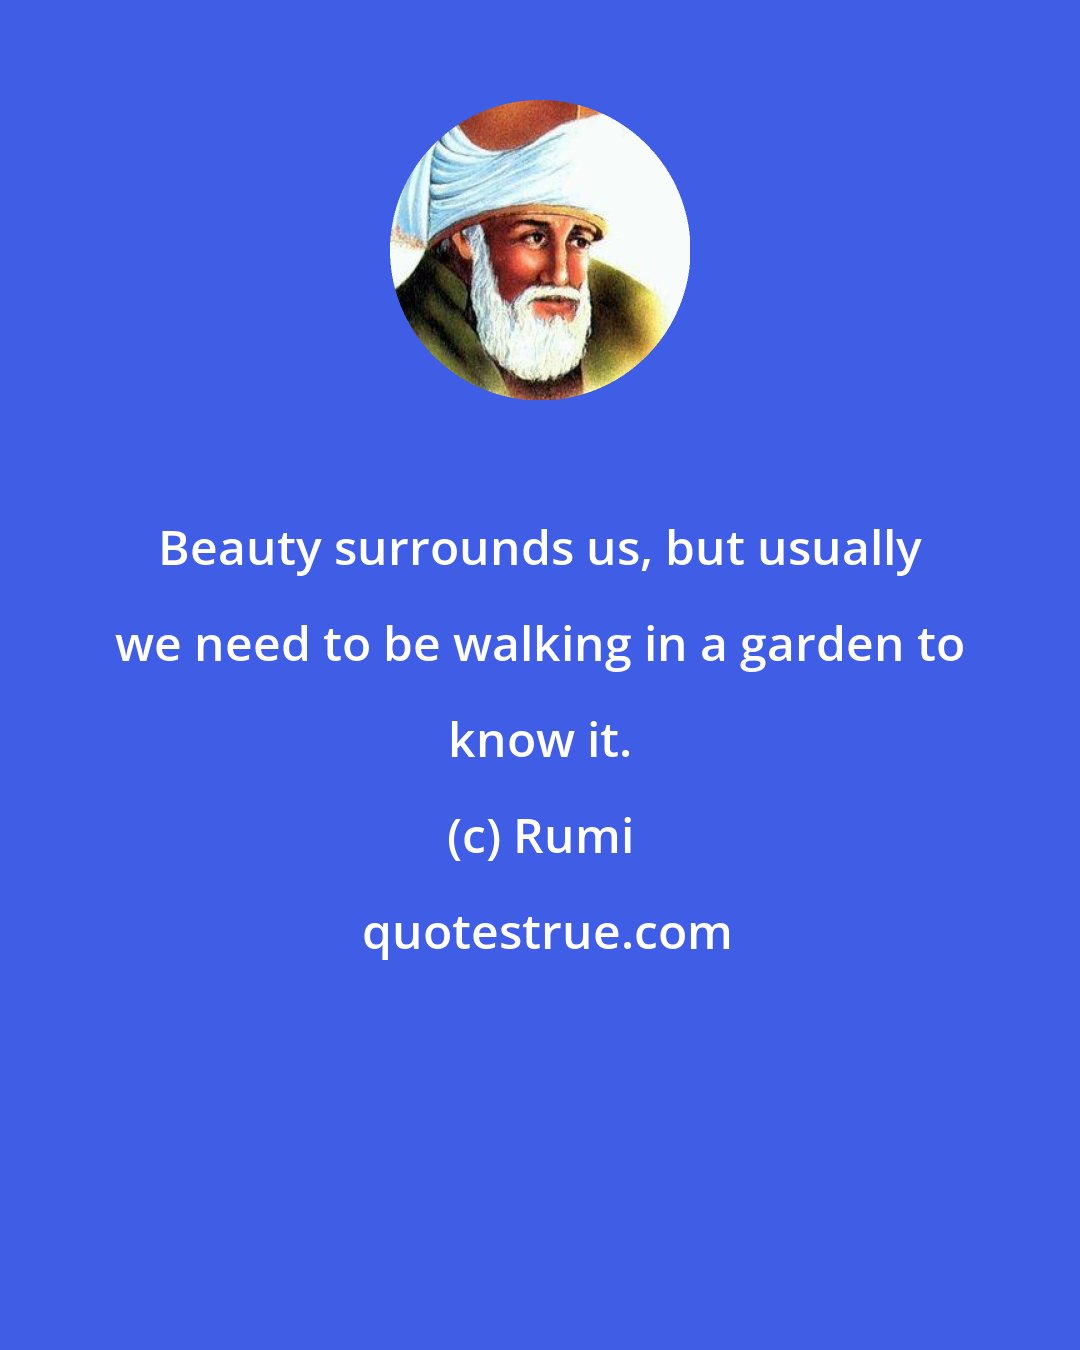 Rumi: Beauty surrounds us, but usually we need to be walking in a garden to know it.